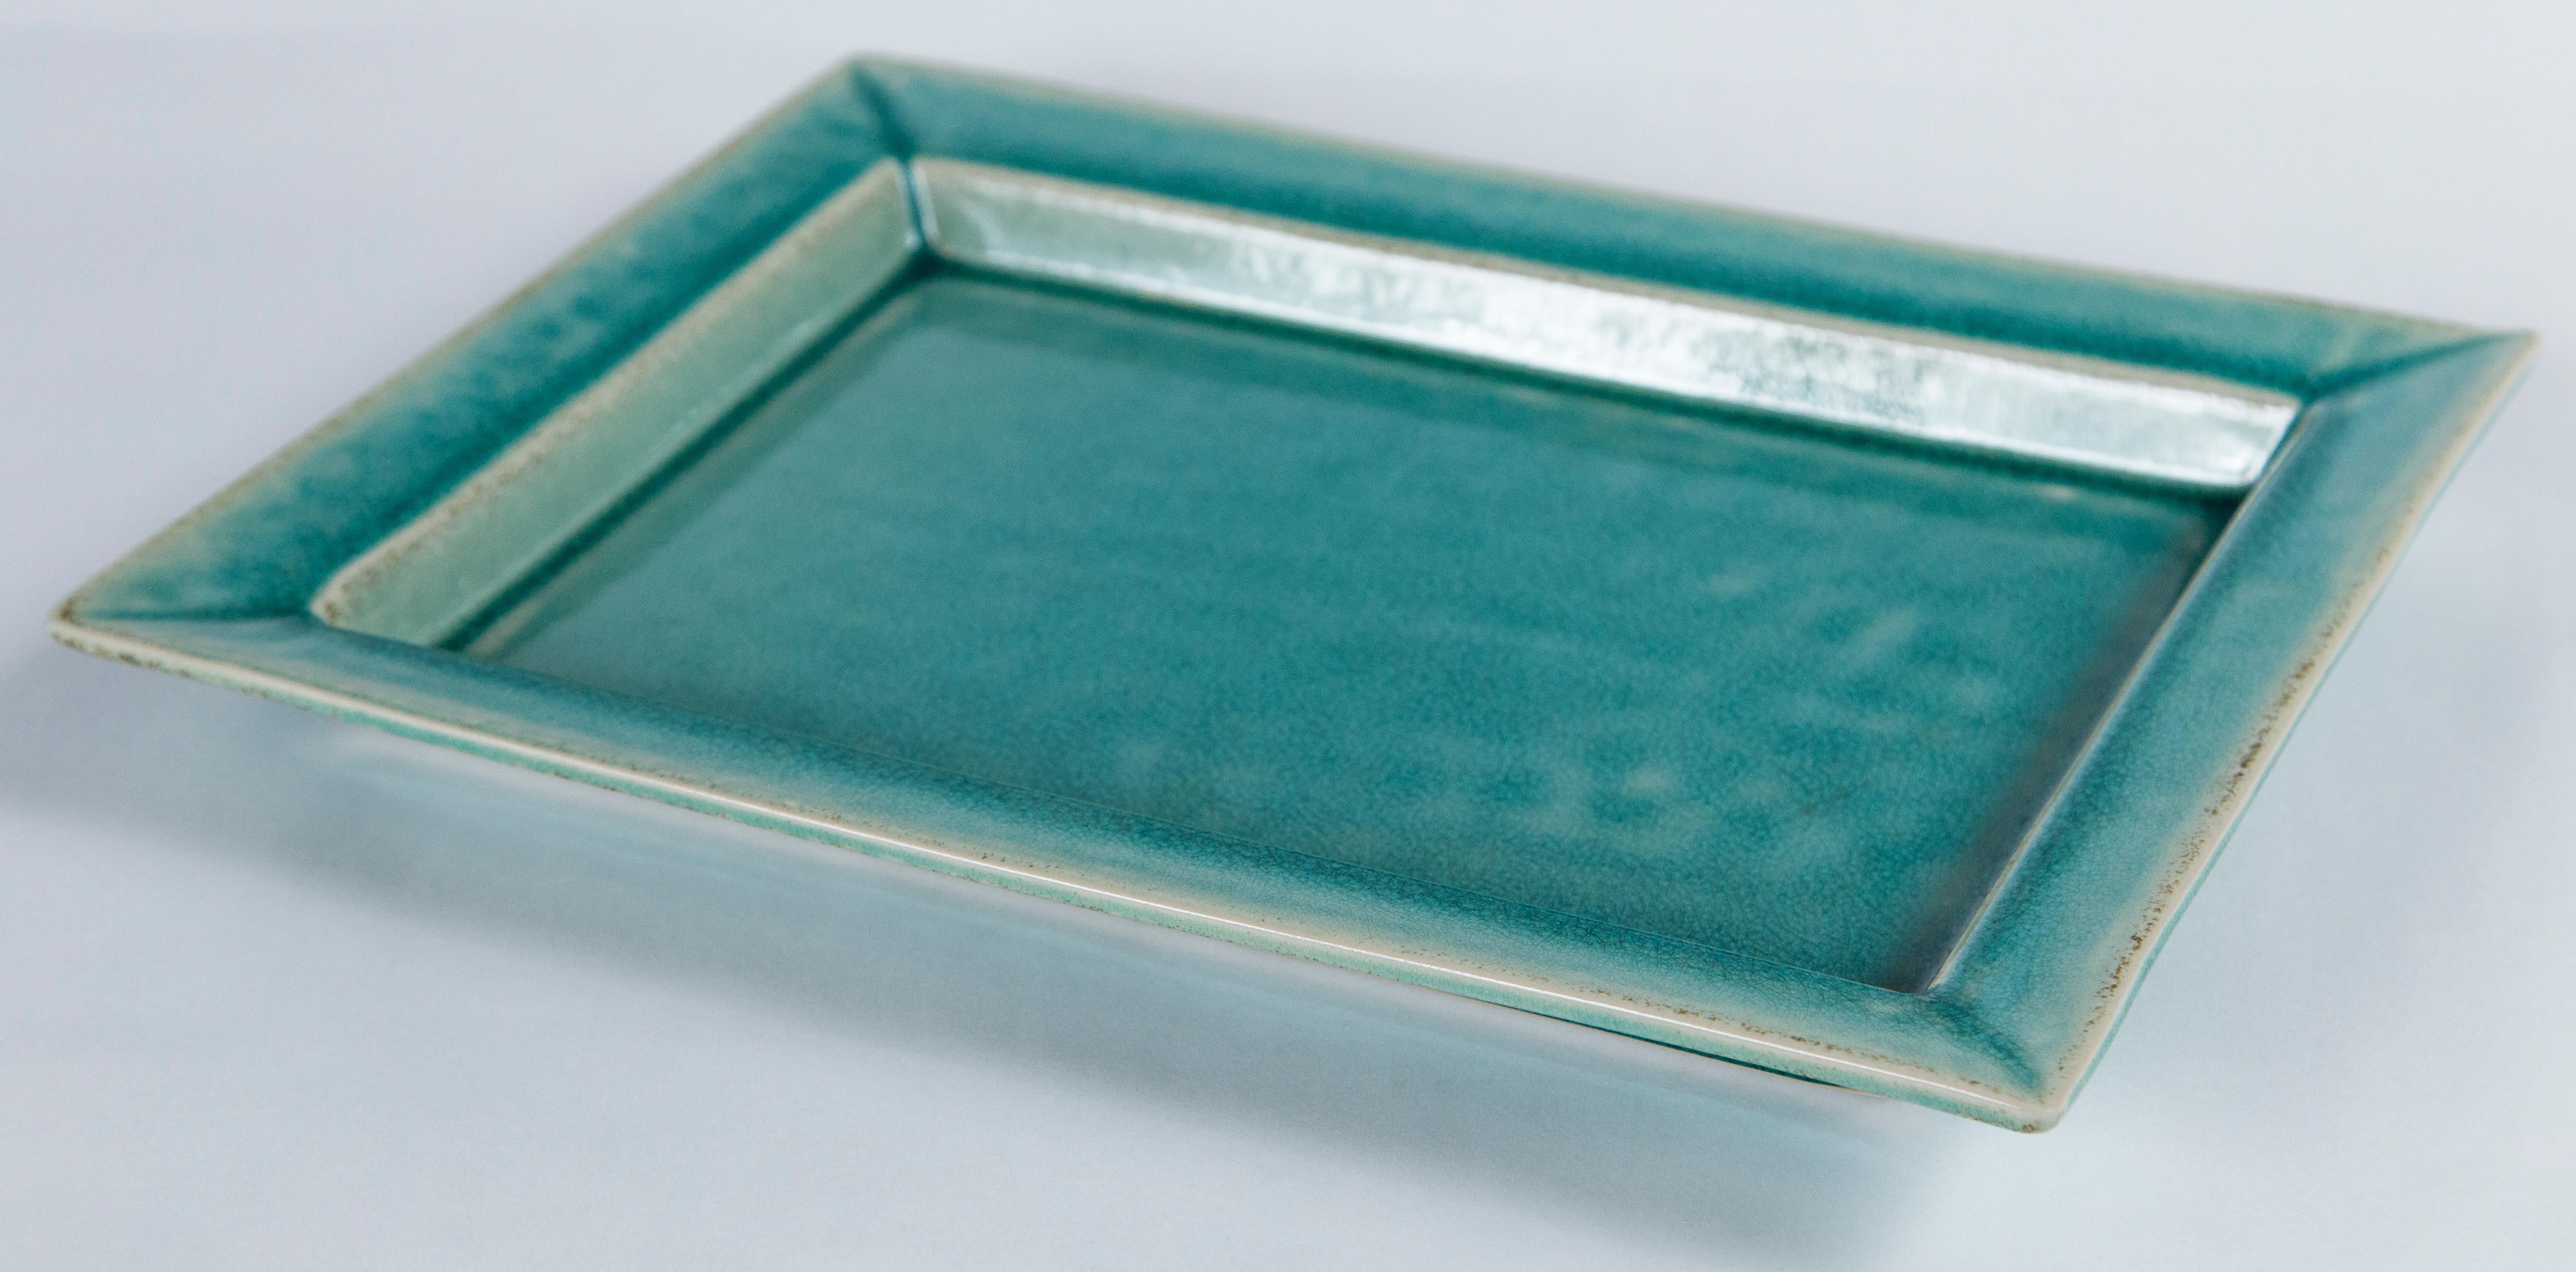 Vintage crackle-glaze ceramic tray, by Jars, France, mid-20th century. A signature beautiful turquoise blue crackle-glaze. Jars Ceramistes was founded in 1857 by Pierre Jars.